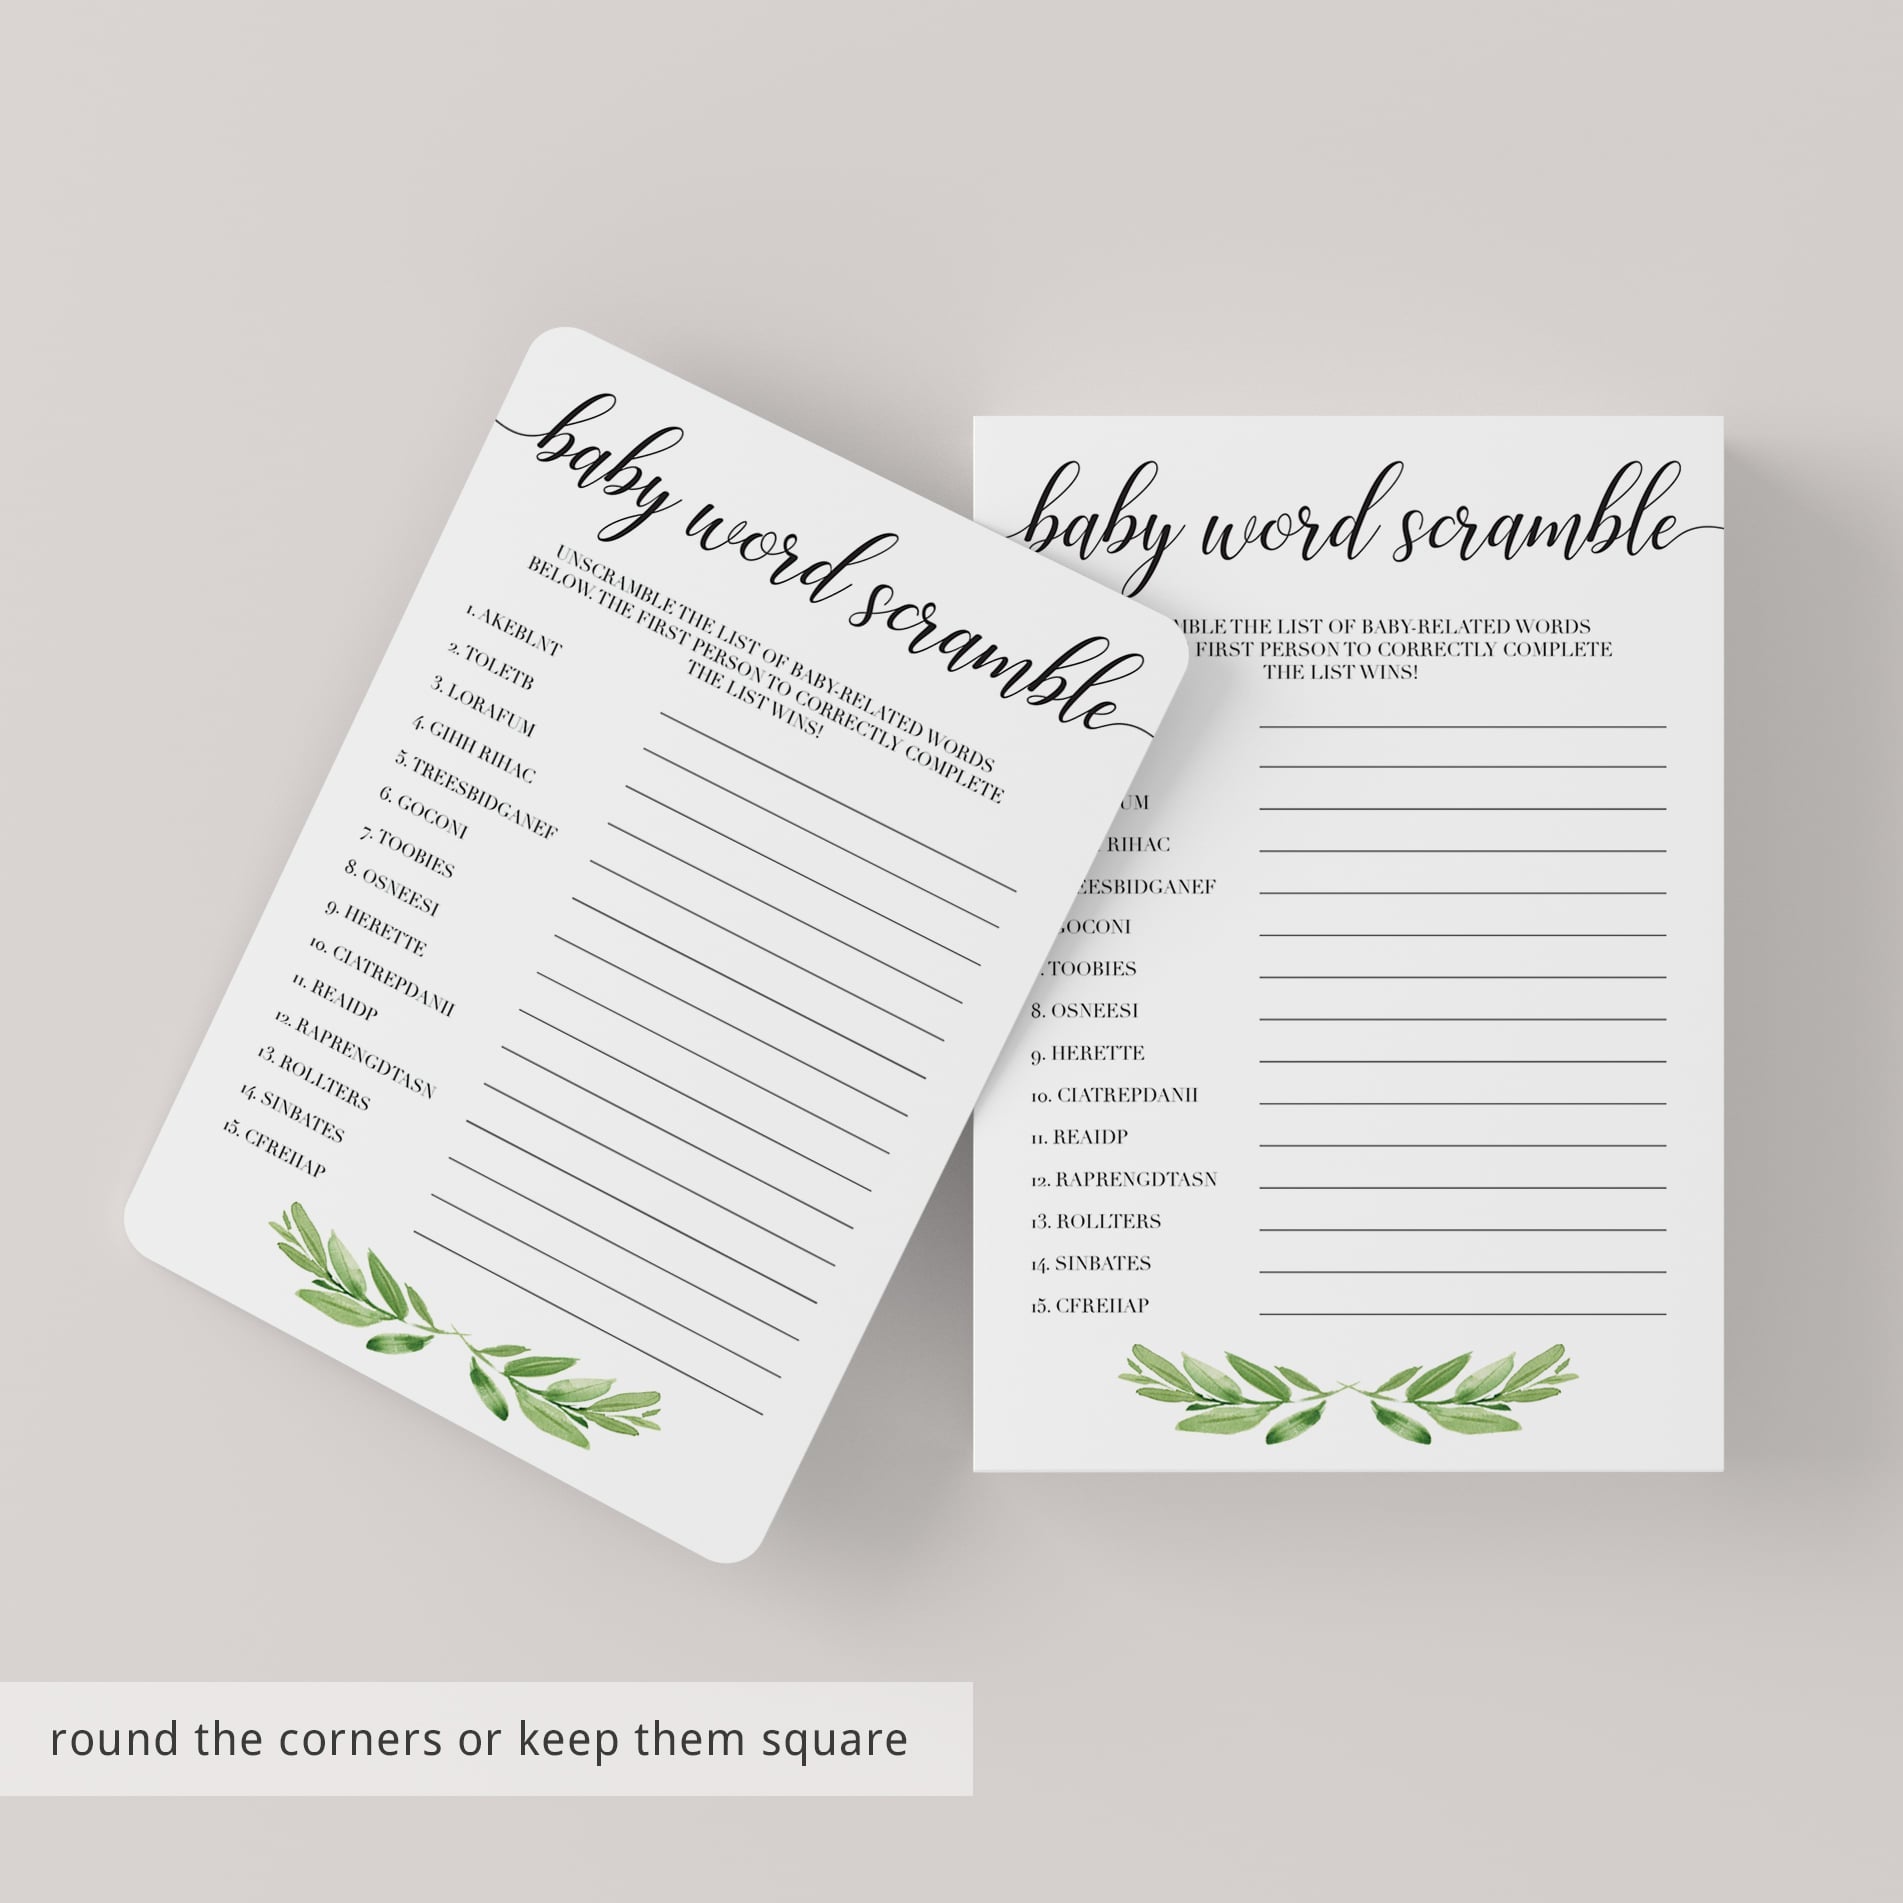 Printable baby shower game templates baby word scramble by LittleSizzle